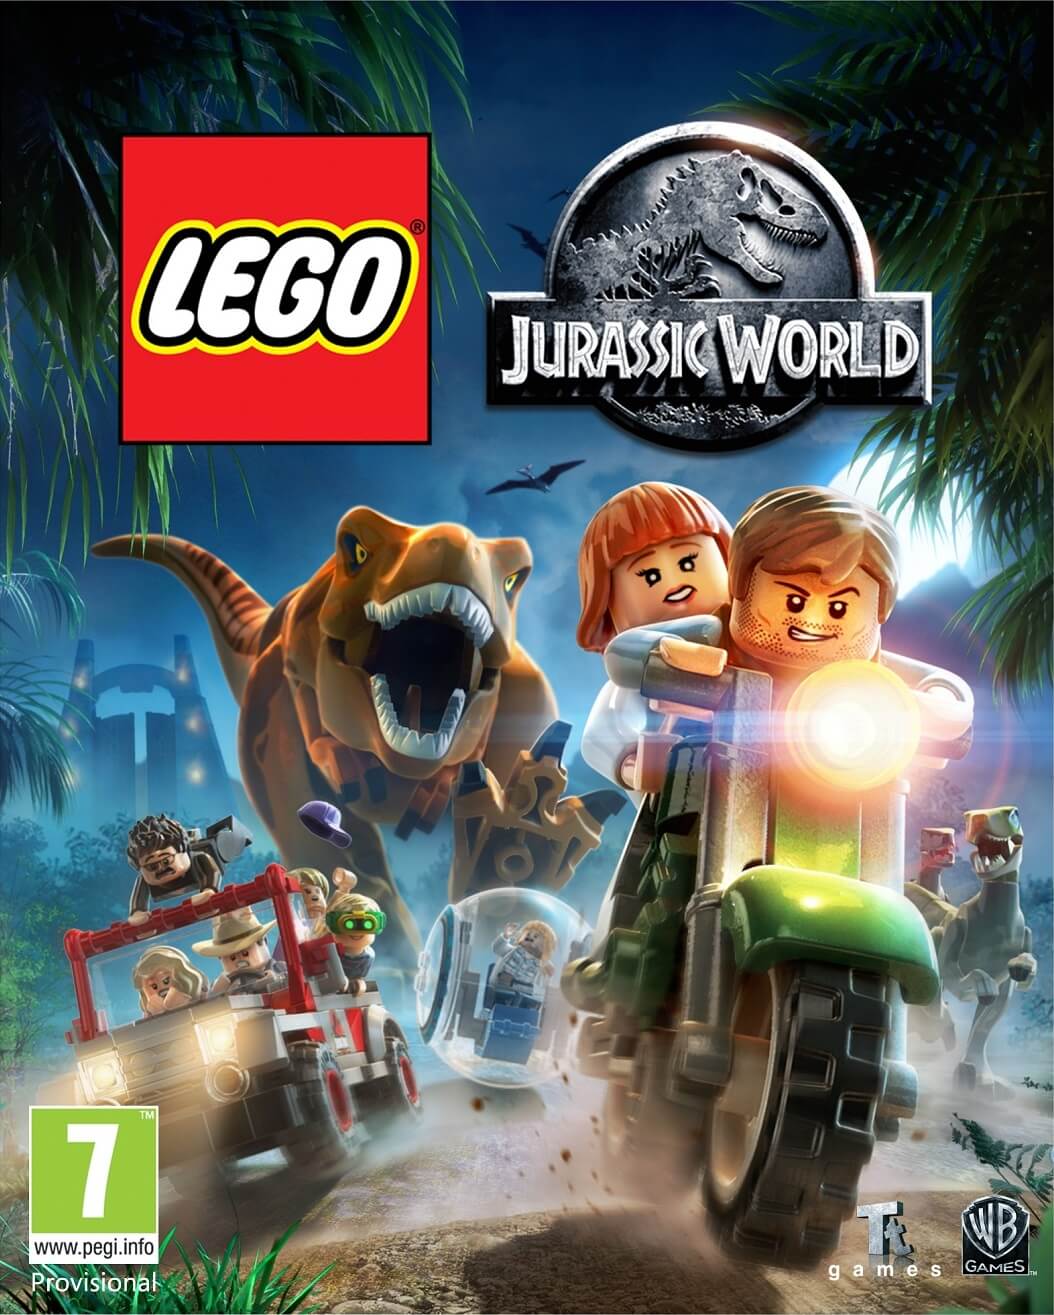 LEGO Jurassic World Video Game Giveaway